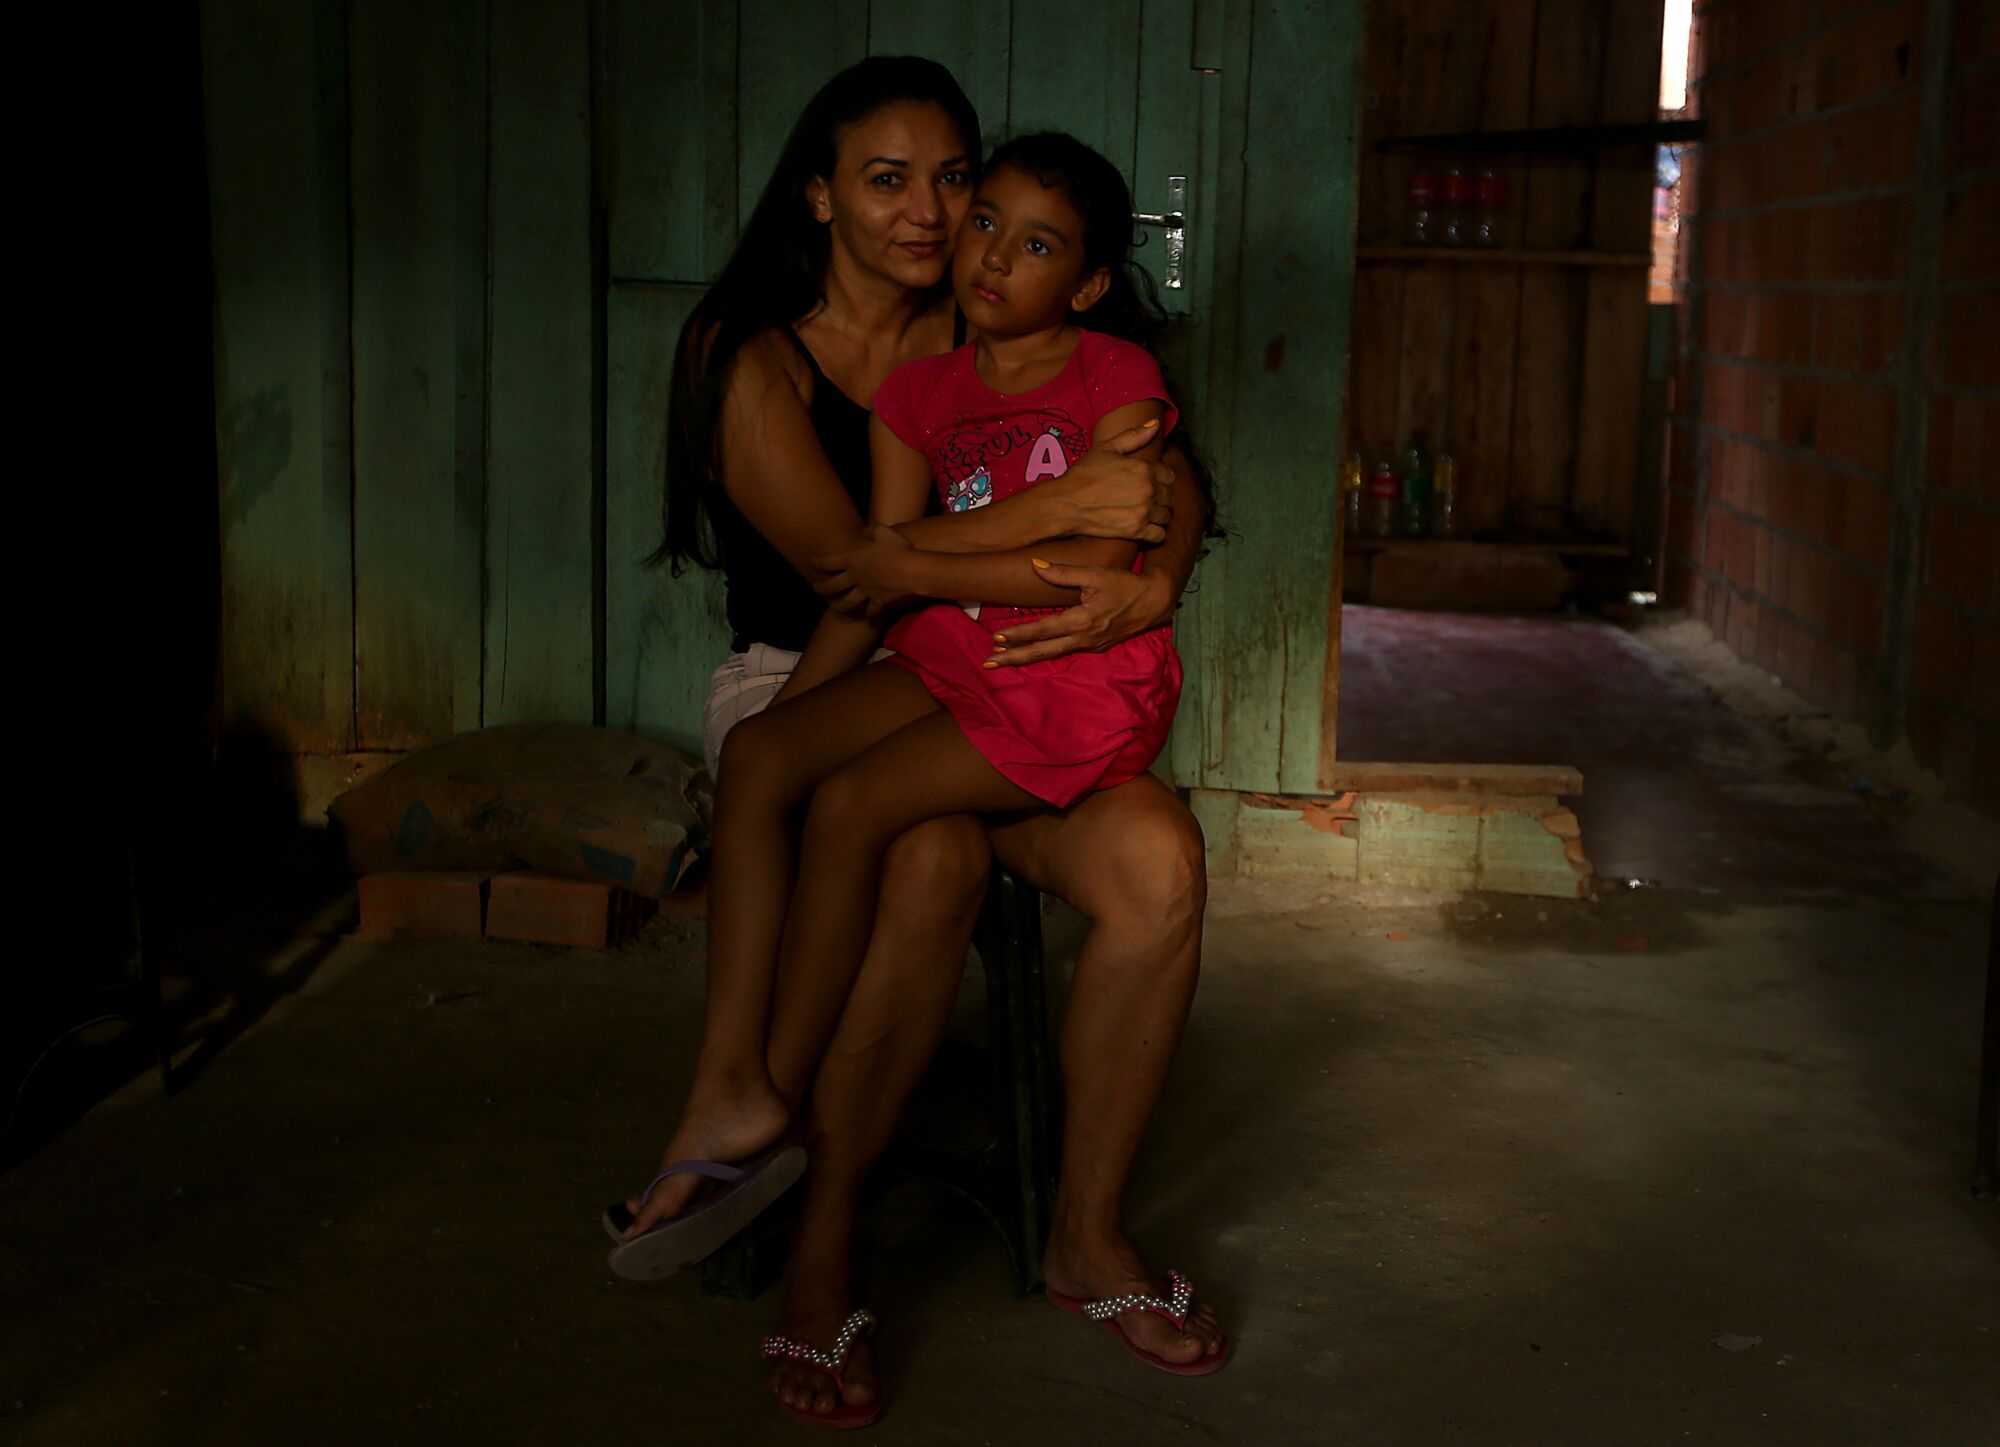 Ludernilce Peixoto Costa and her daughter Adrielly sit in a chair at their home